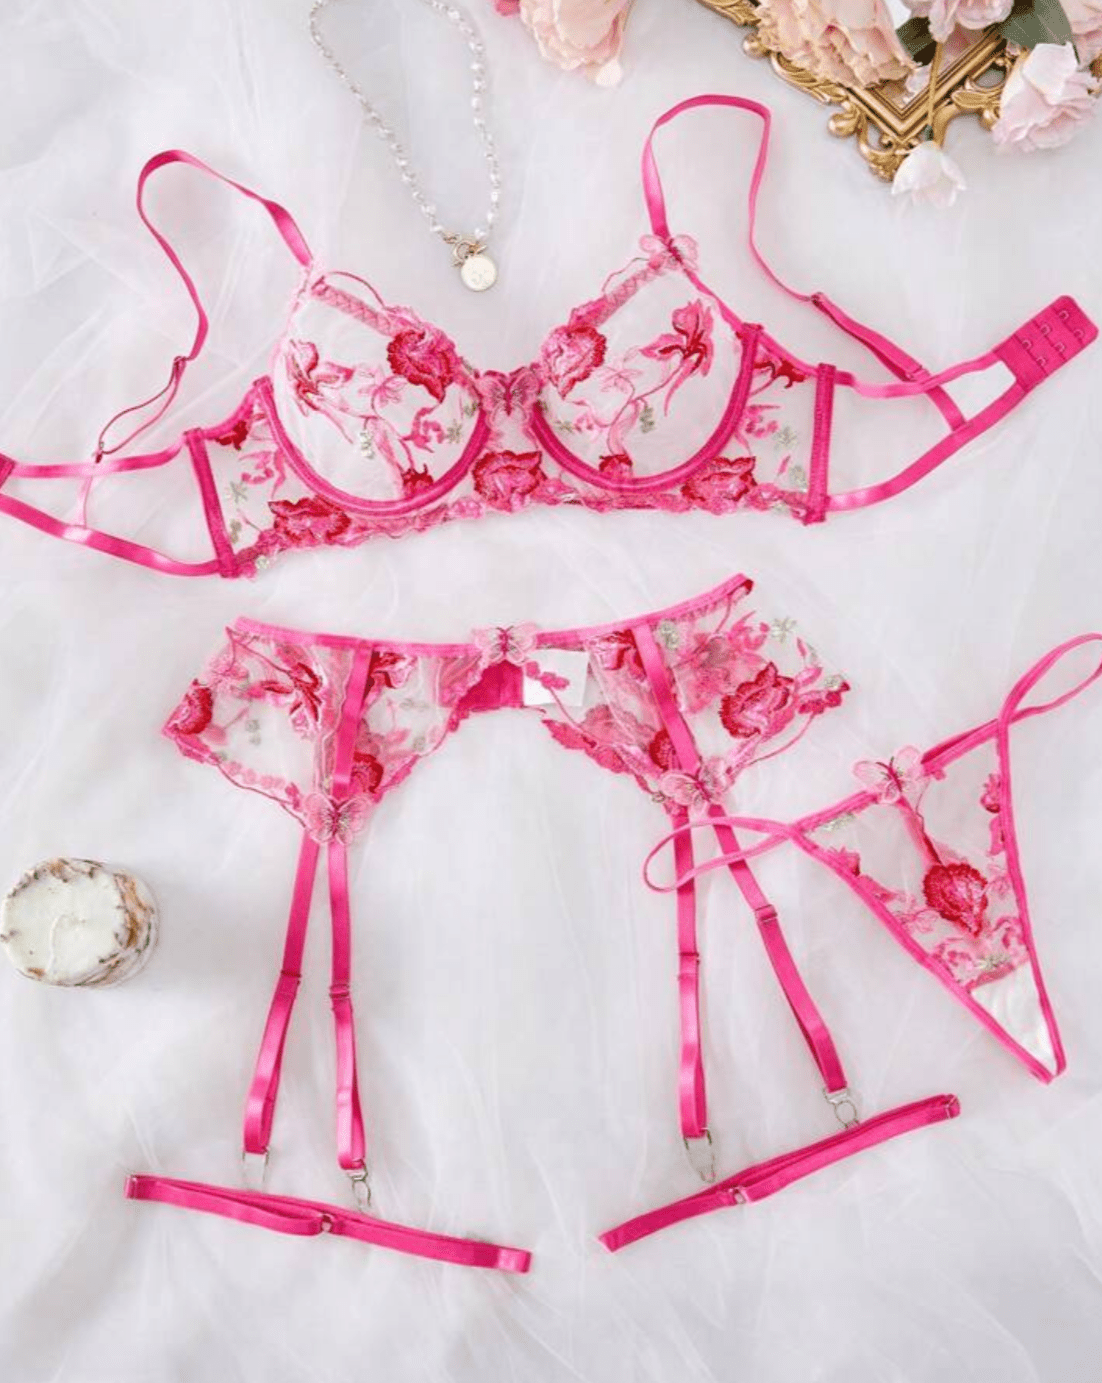 hot pink lace lingerie set with garter